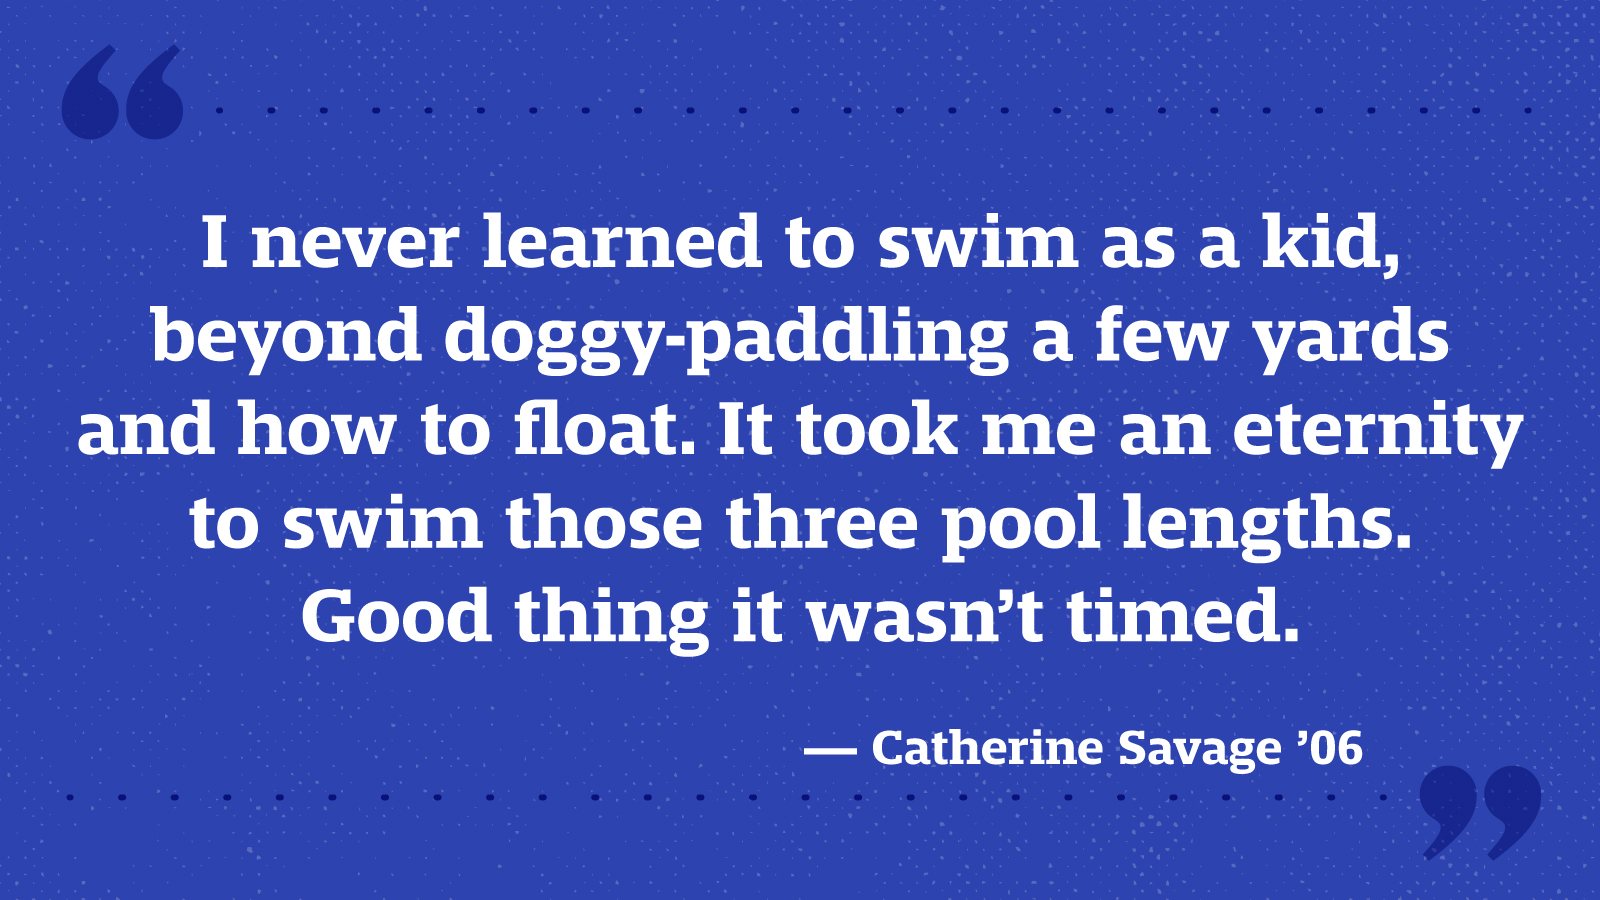 I never learned to swim as a kid, beyond doggy-paddling a few yards and how to float. It took me an eternity to swim those three pool lengths. Good thing it wasn’t timed. — Catherine Savage ’06